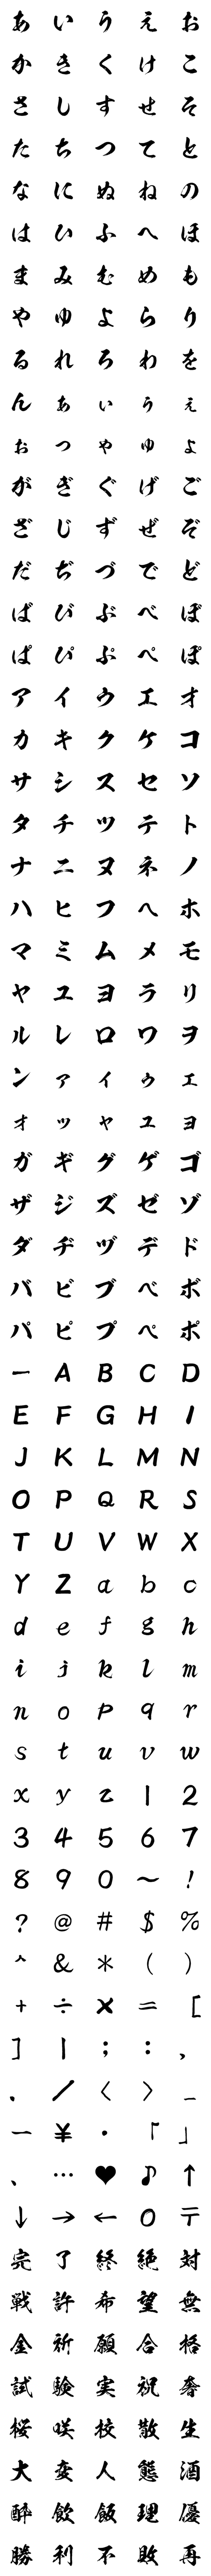 [LINE絵文字]▶映画の終わりみたい立ち上がる動く絵文字の画像一覧